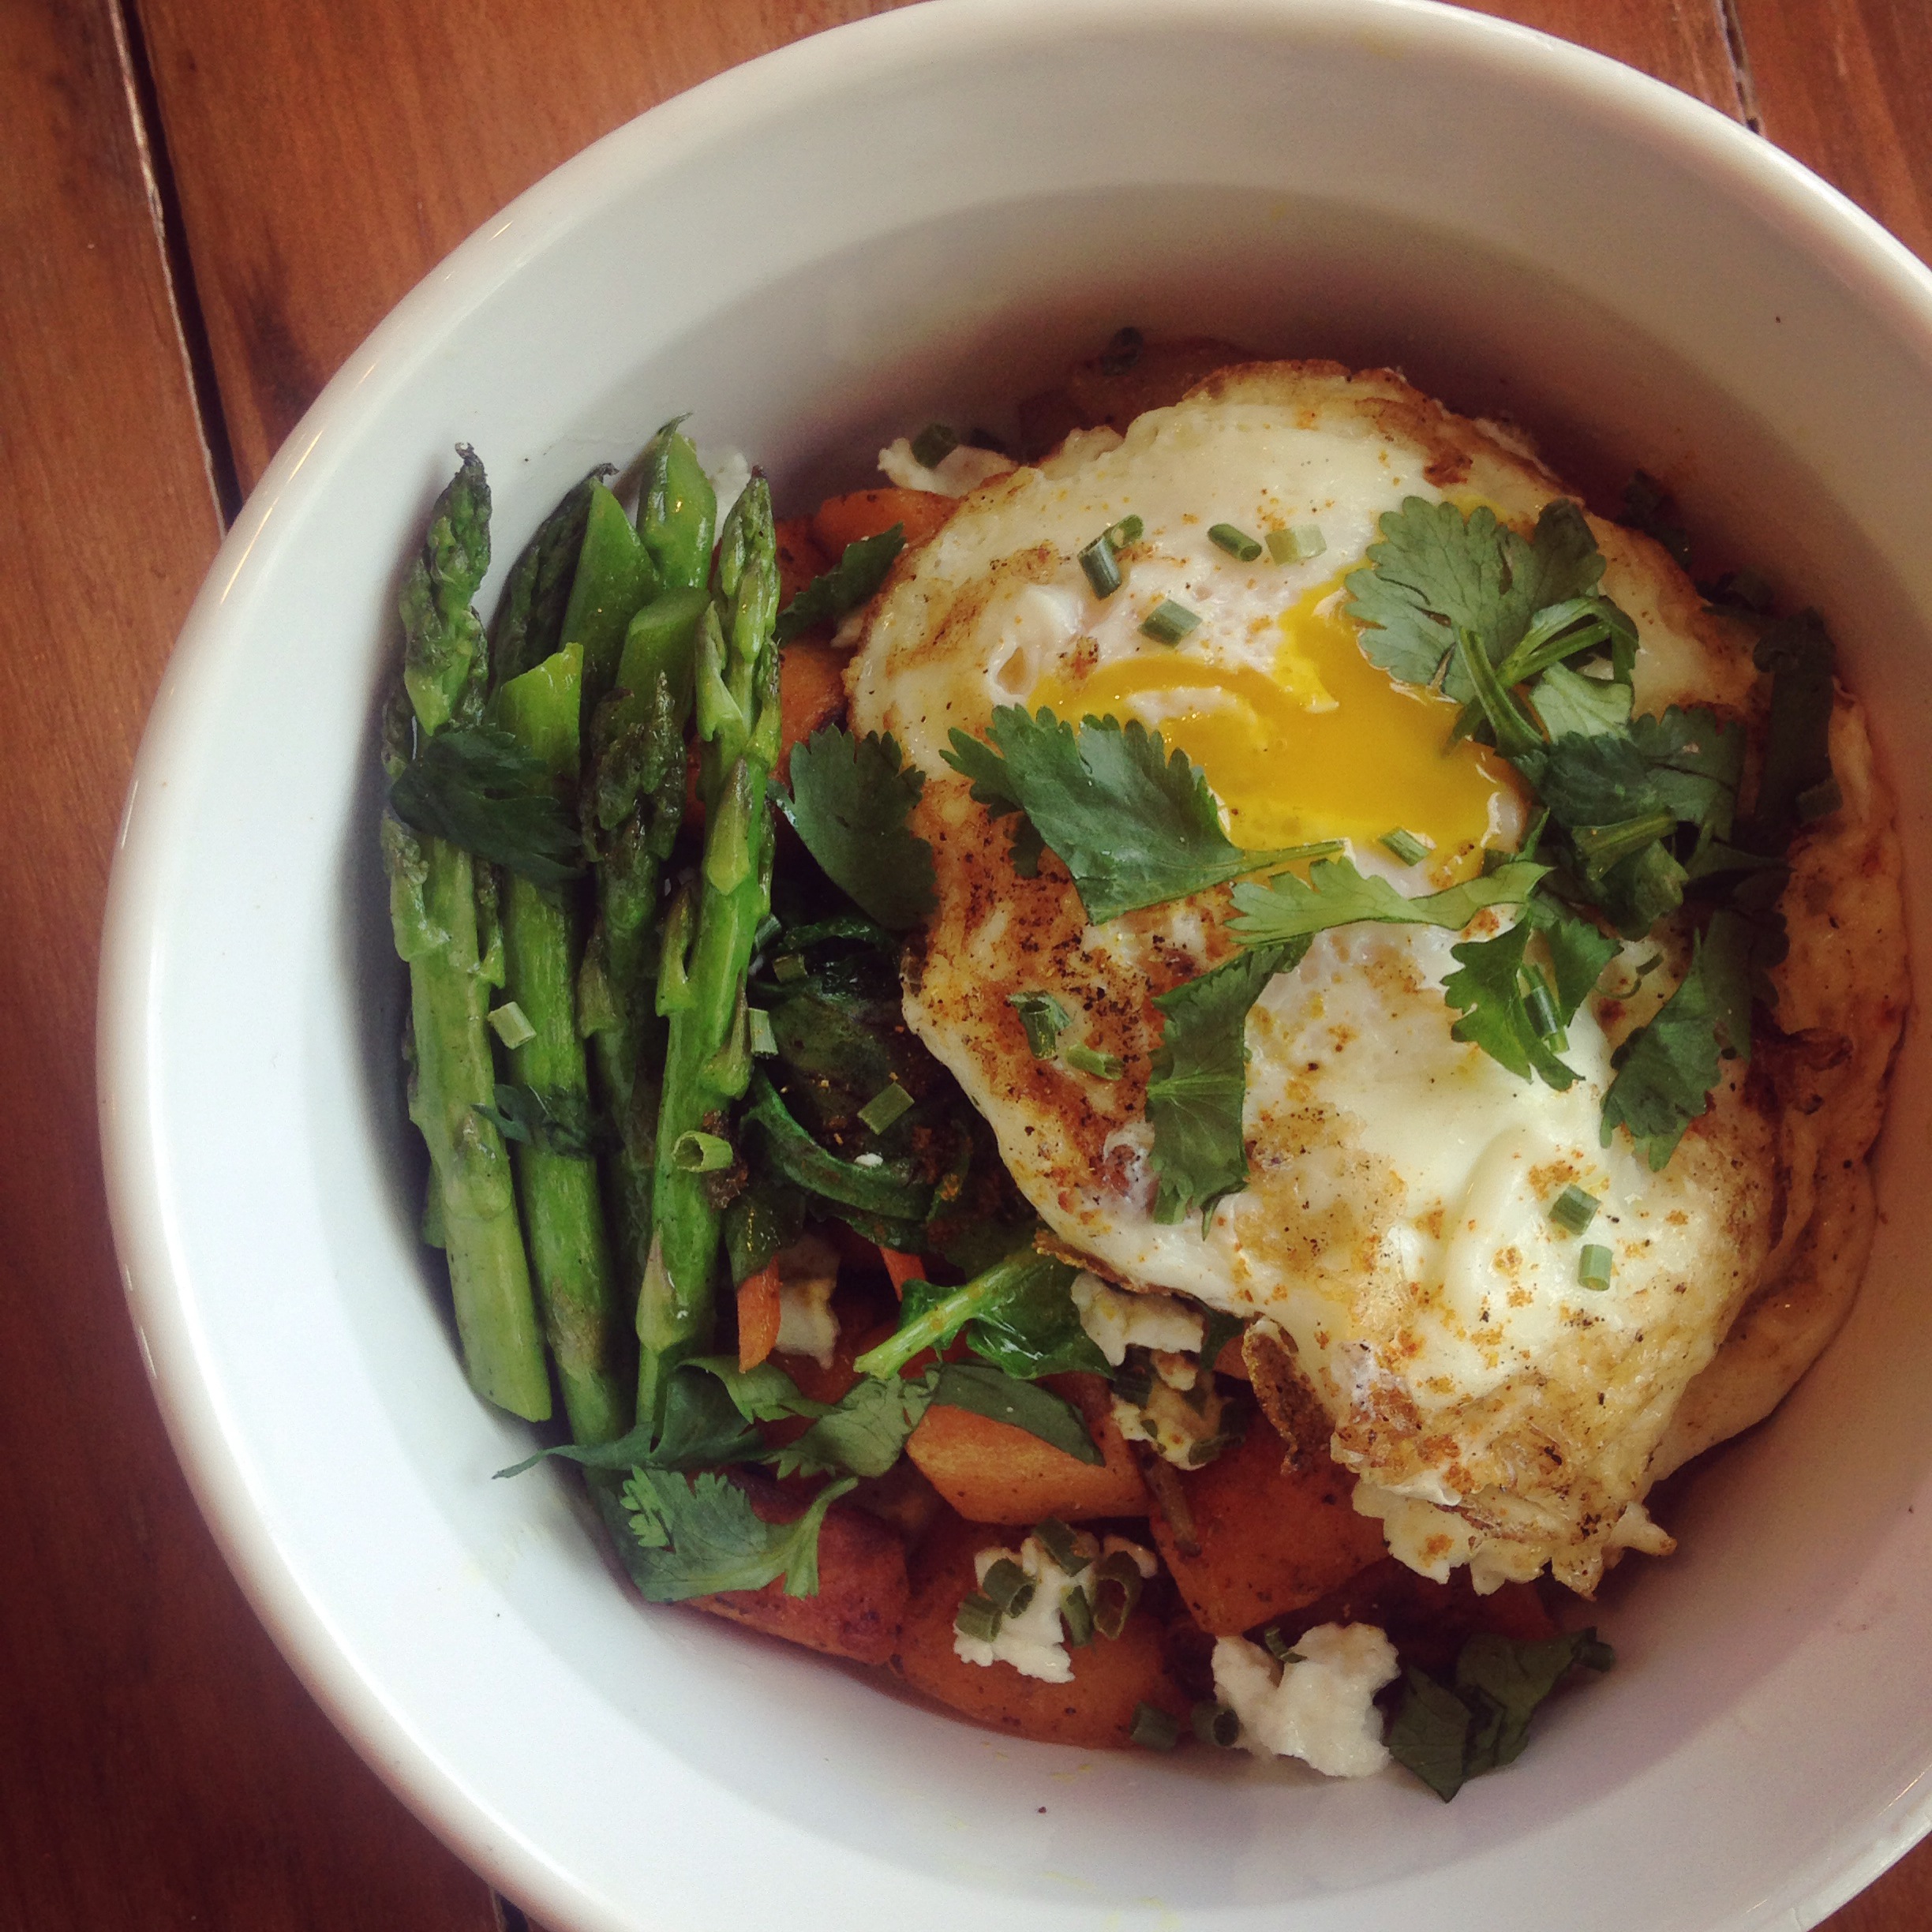 Curried Sweet Potato Hash with Egg, Greens & Asparagus